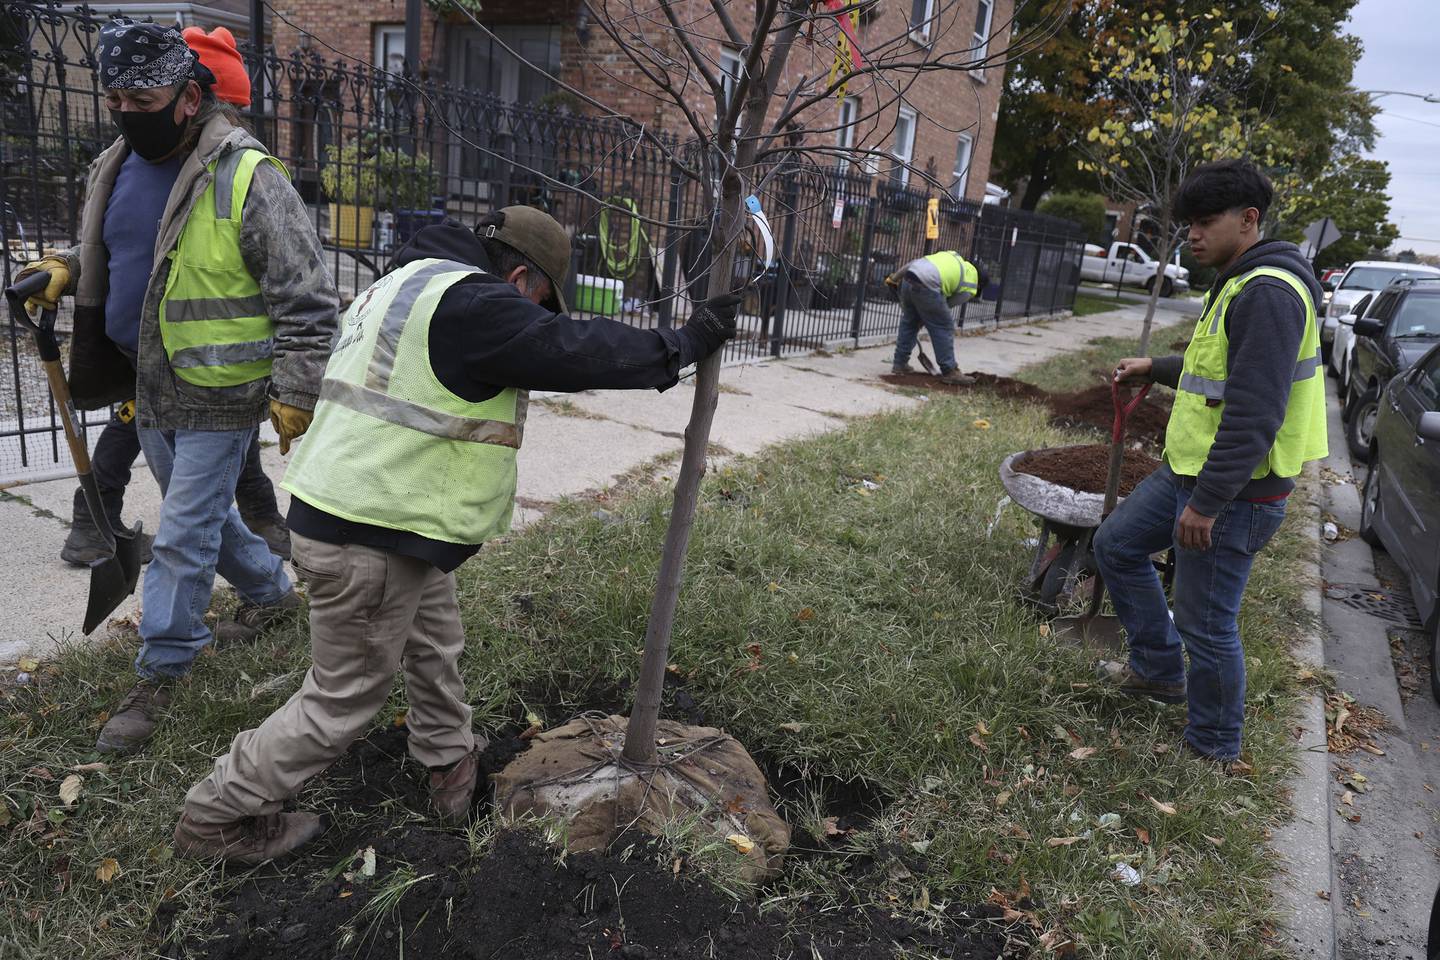 City vendor Seven-D Construction Co. workers plant several trees in the 4400 block of South Christiana Avenue in Chicago on Oct. 20, 2022.